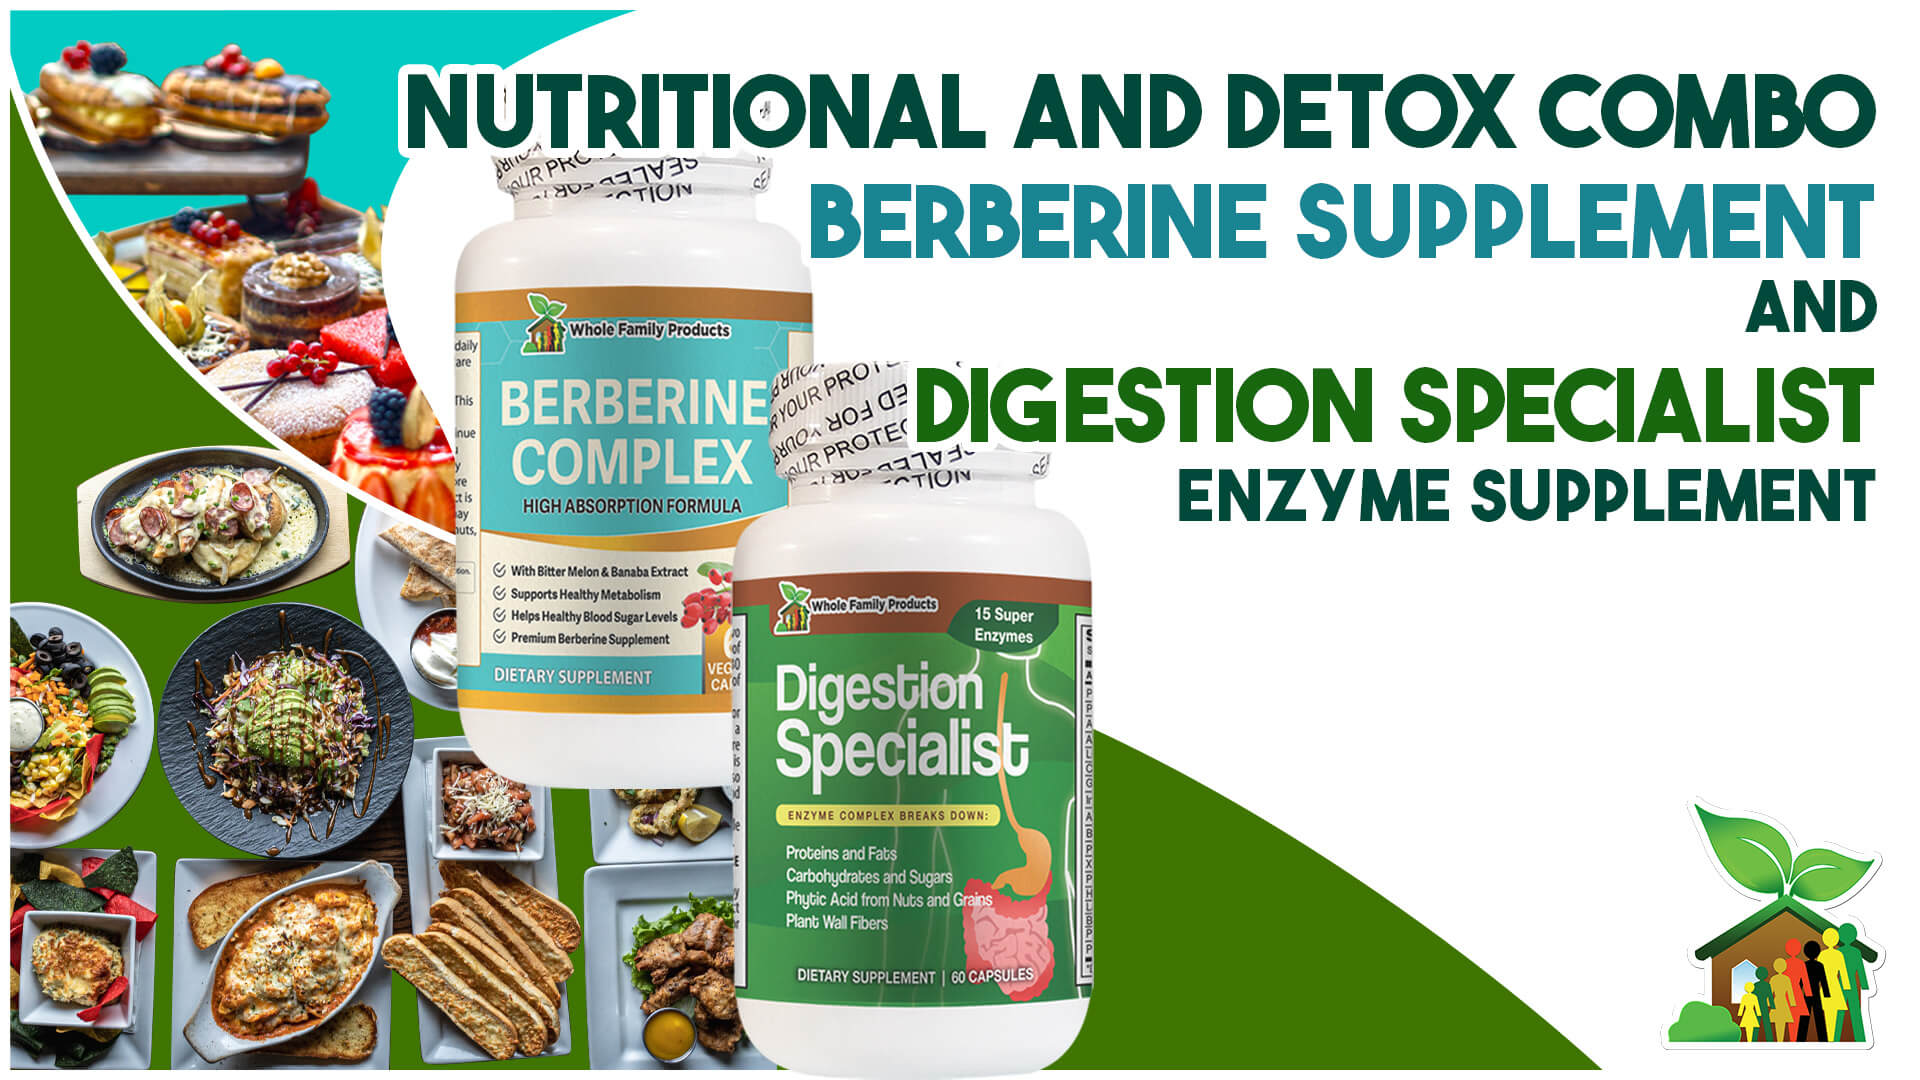 Best Nutritional and Detox Combo: Berberine Supplement and Digestion Specialist Enzyme Supplement